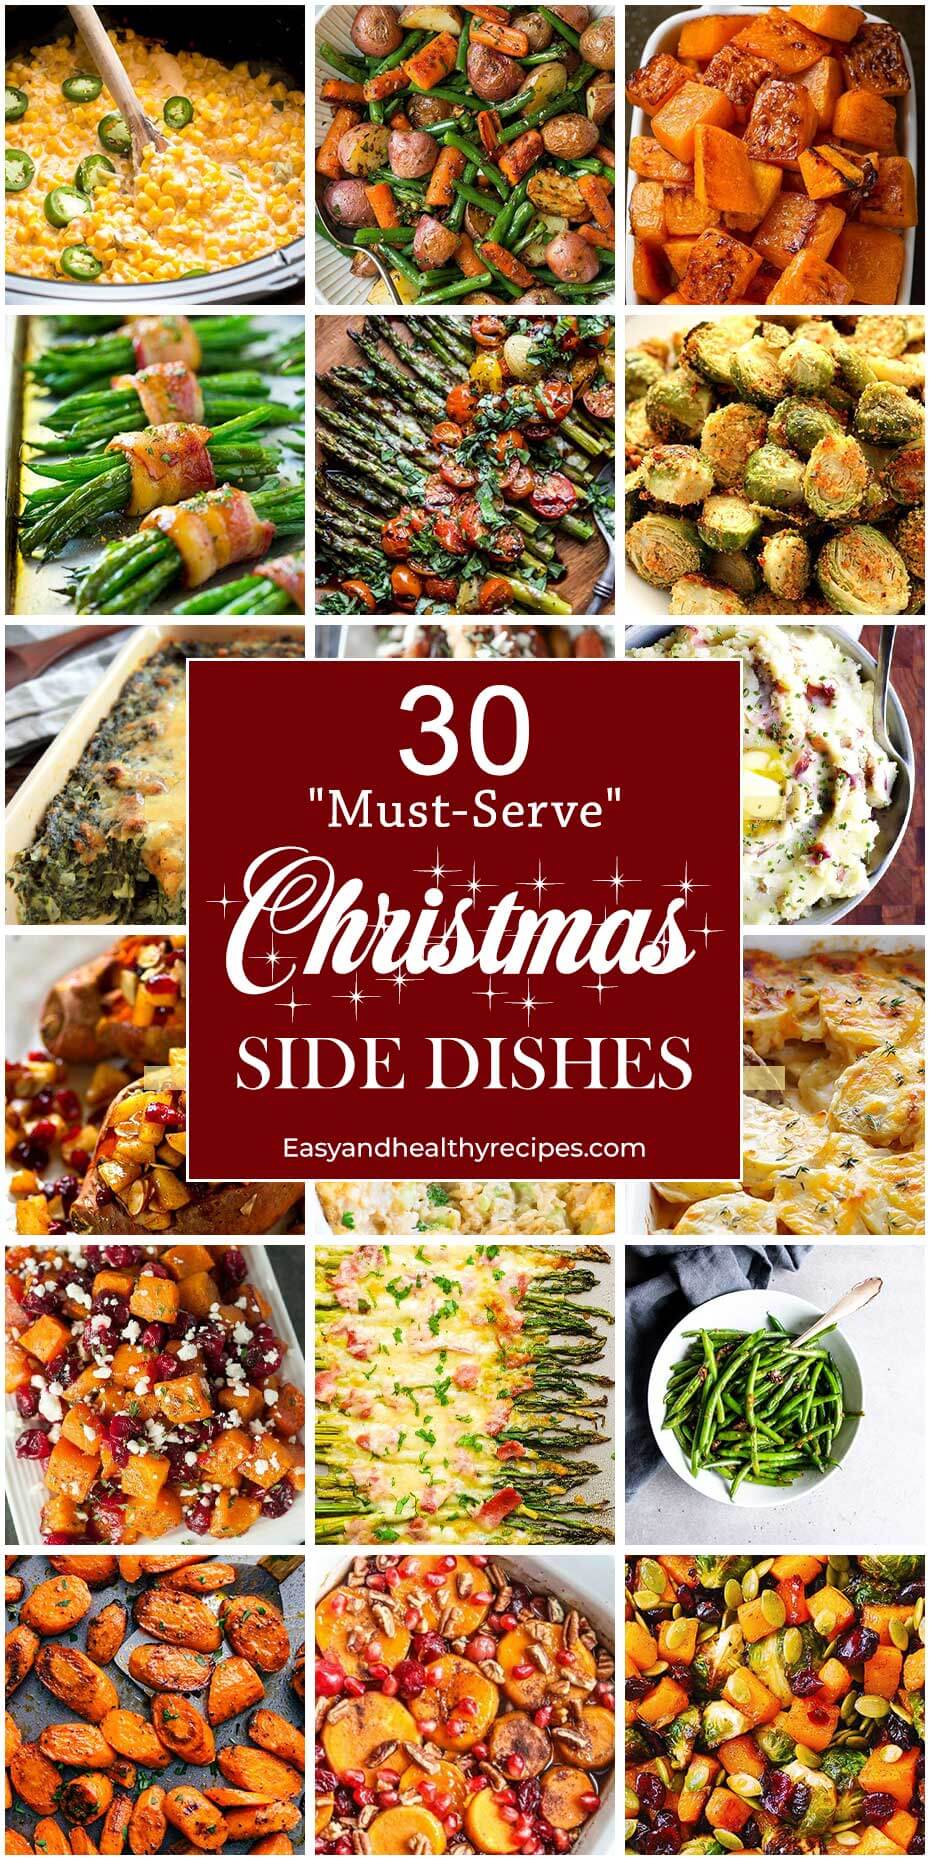 30 “Must-Serve” Christmas Side Dishes - Easy and